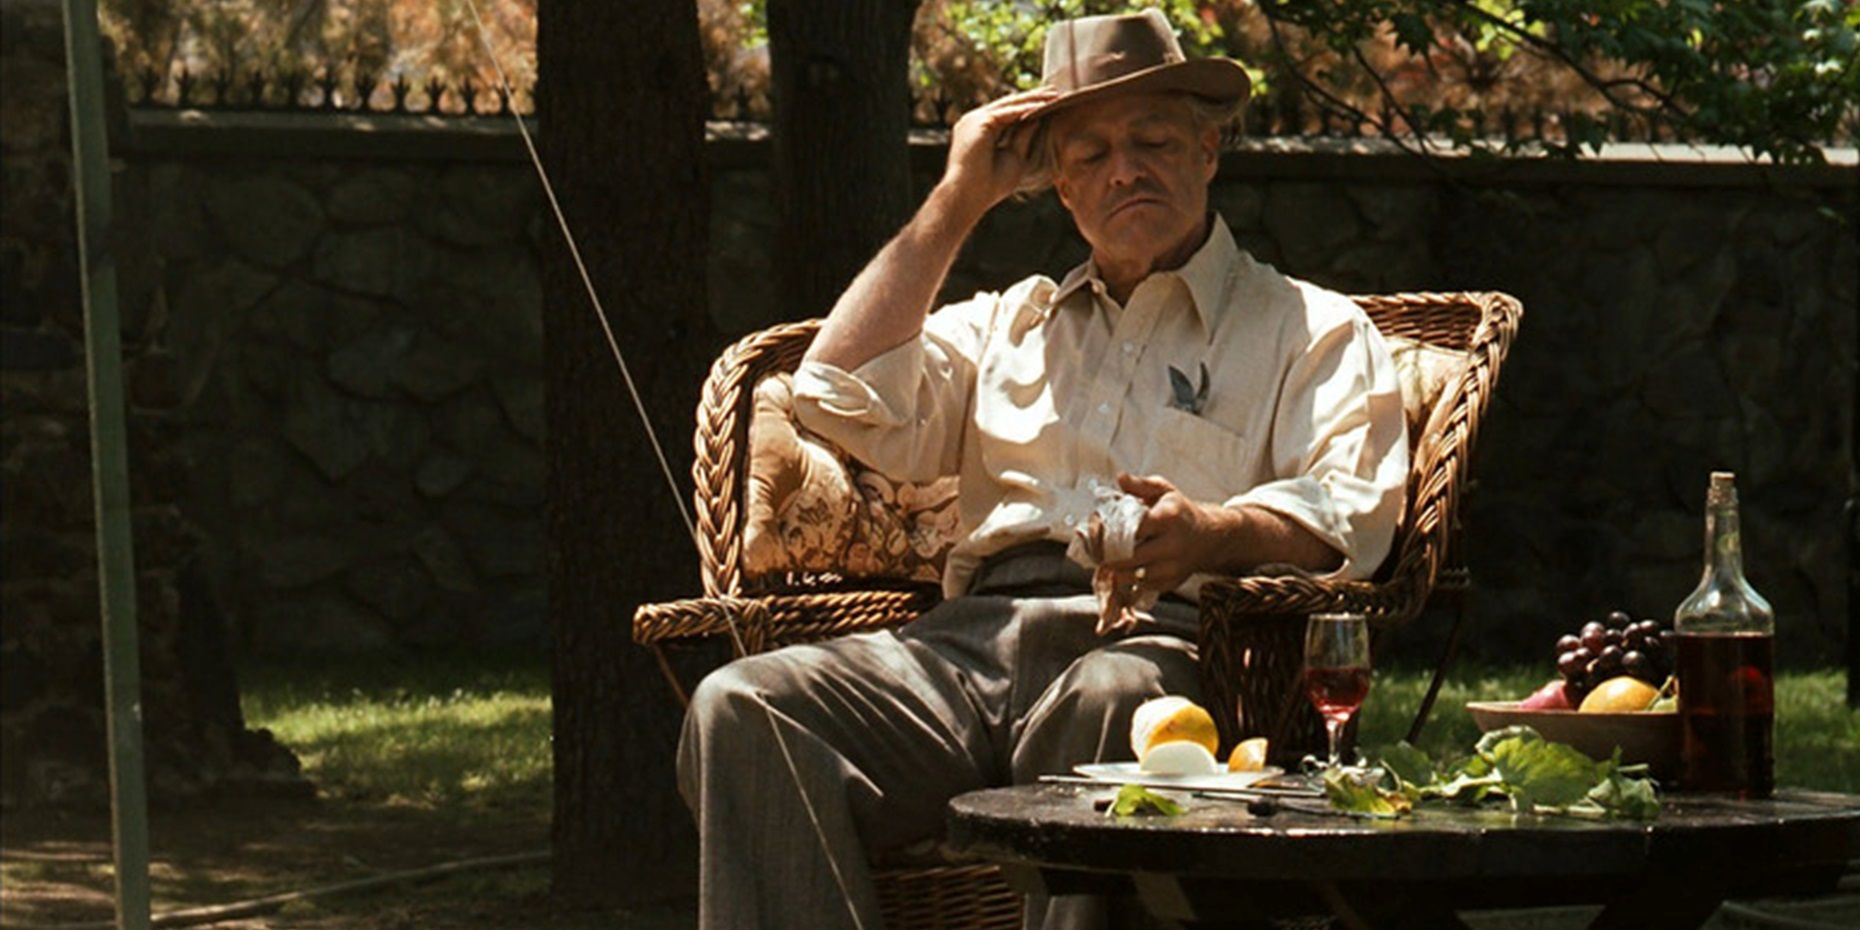 Vito sits in his garden in The Godfather